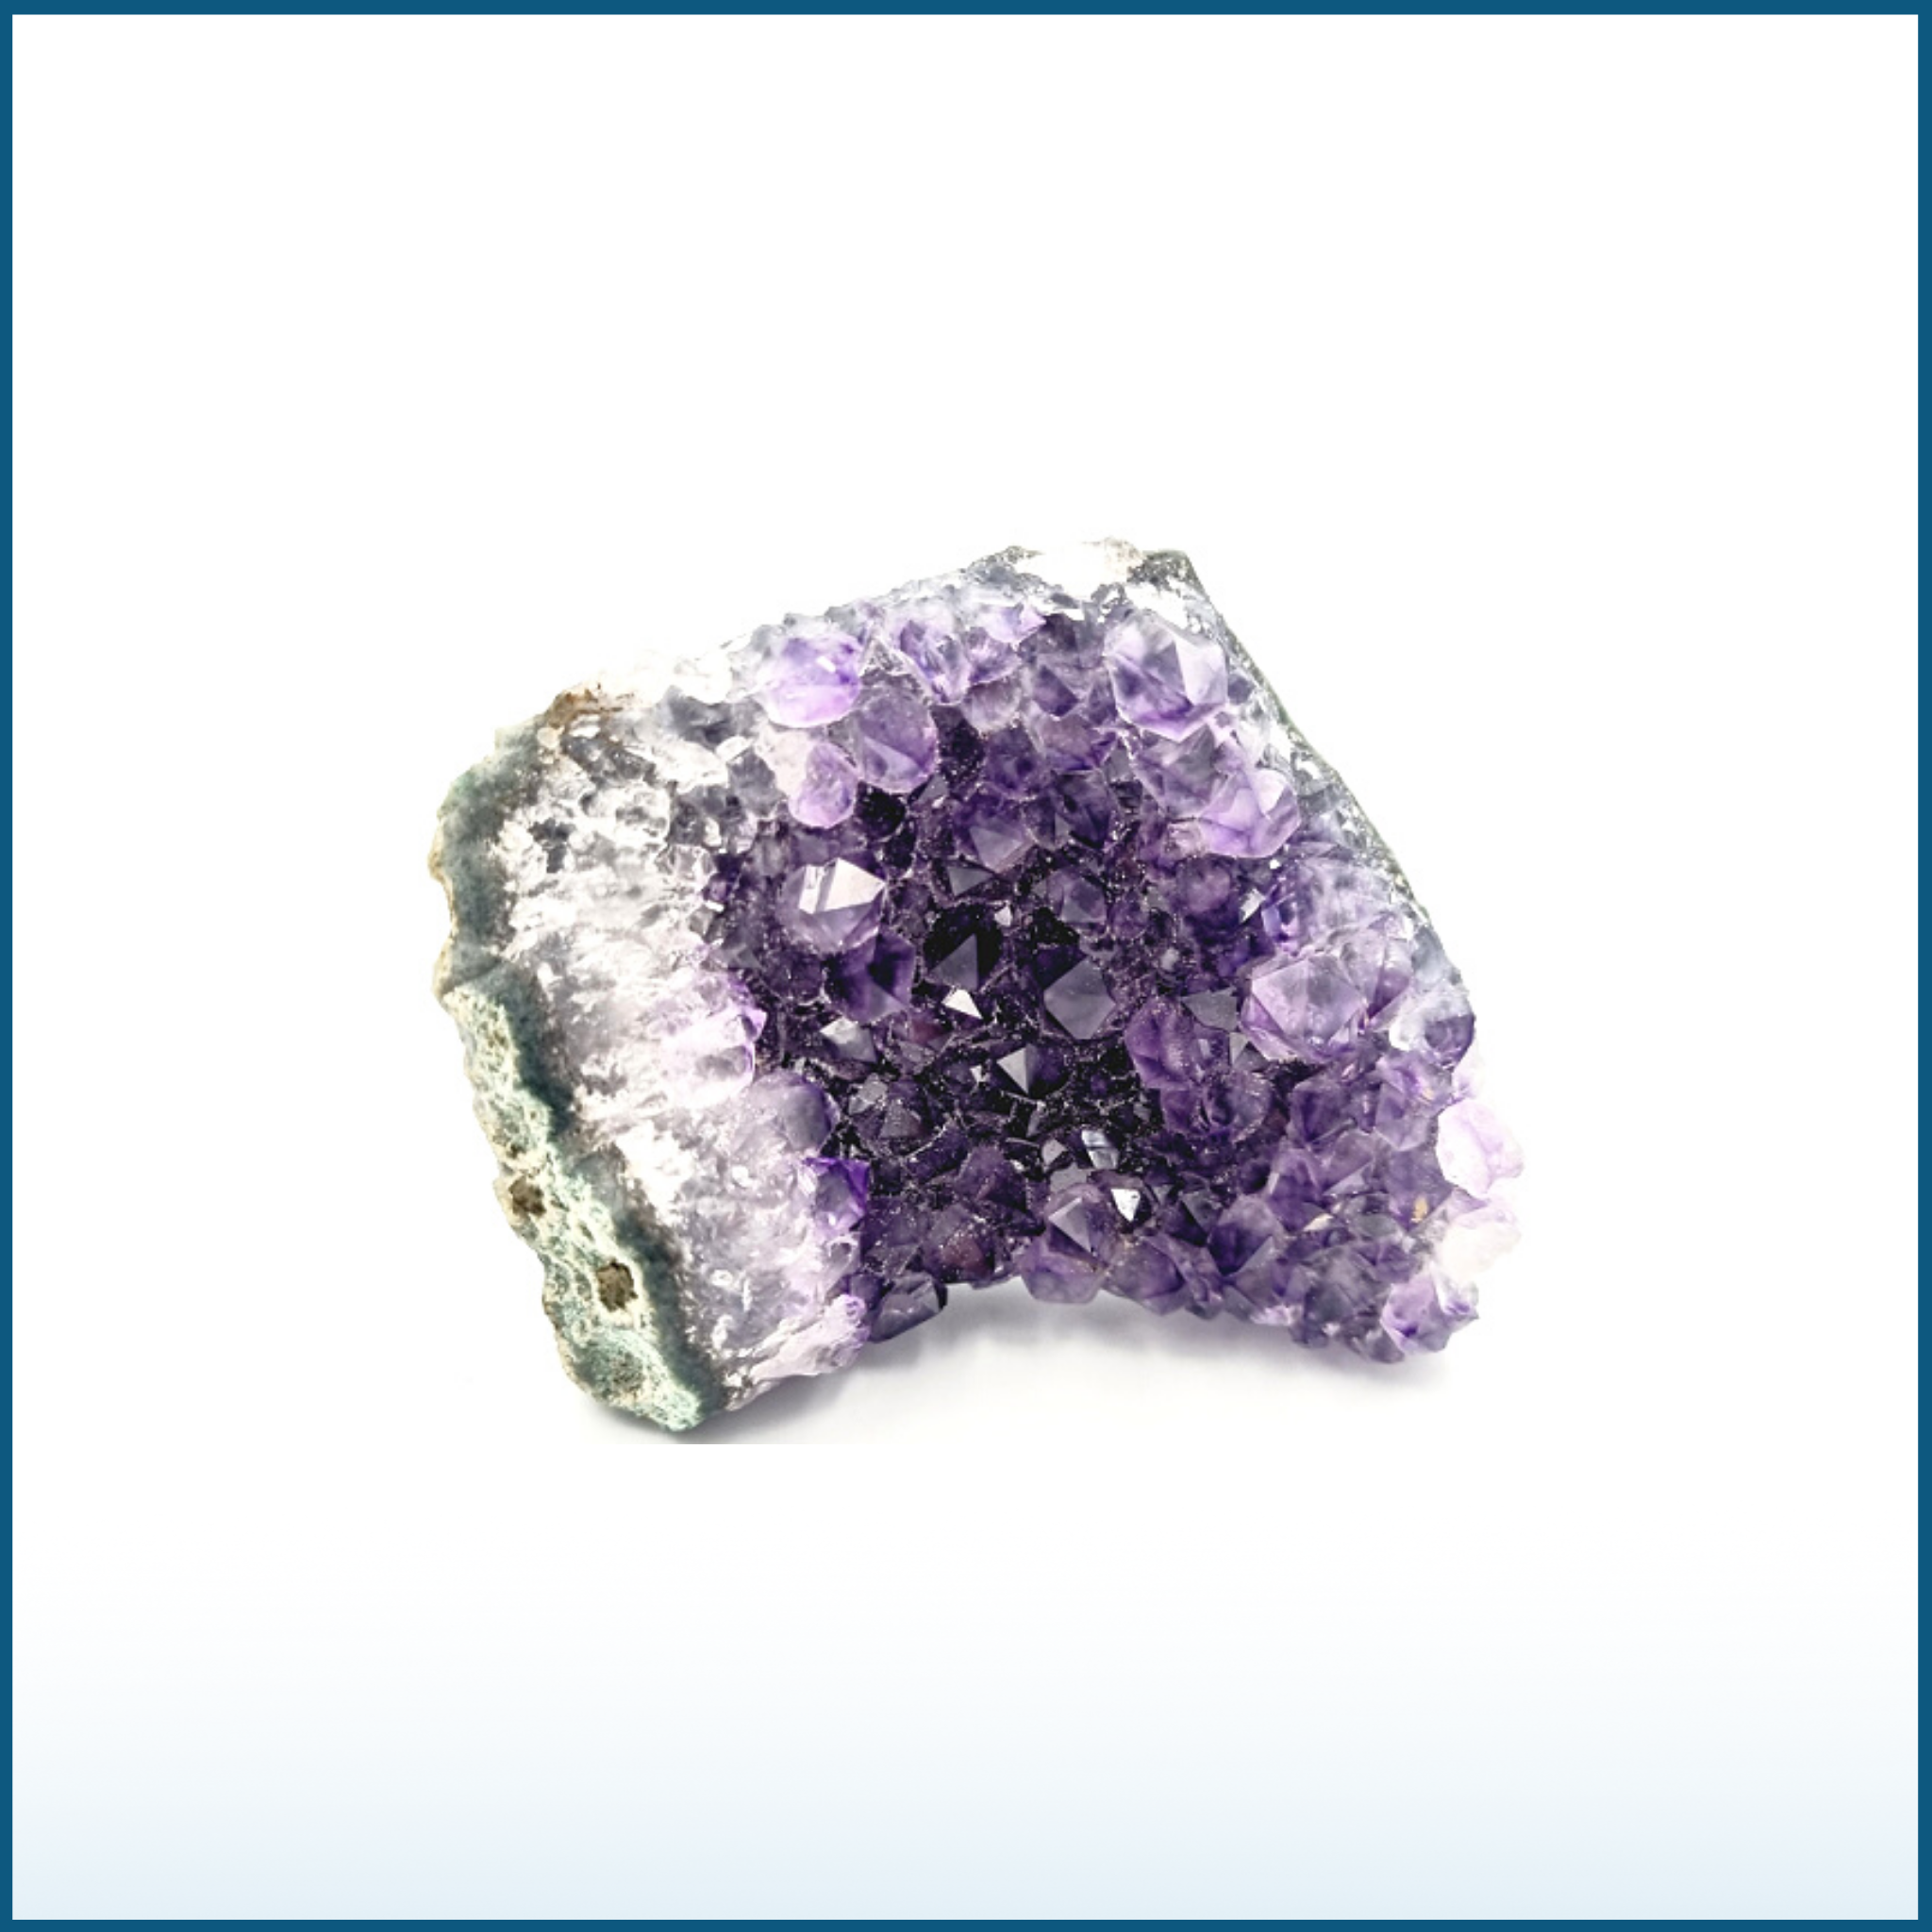 Enhance Your Space with Stunning Amethyst Clusters - Natural Healing Crystals for Positive Energy and Décor